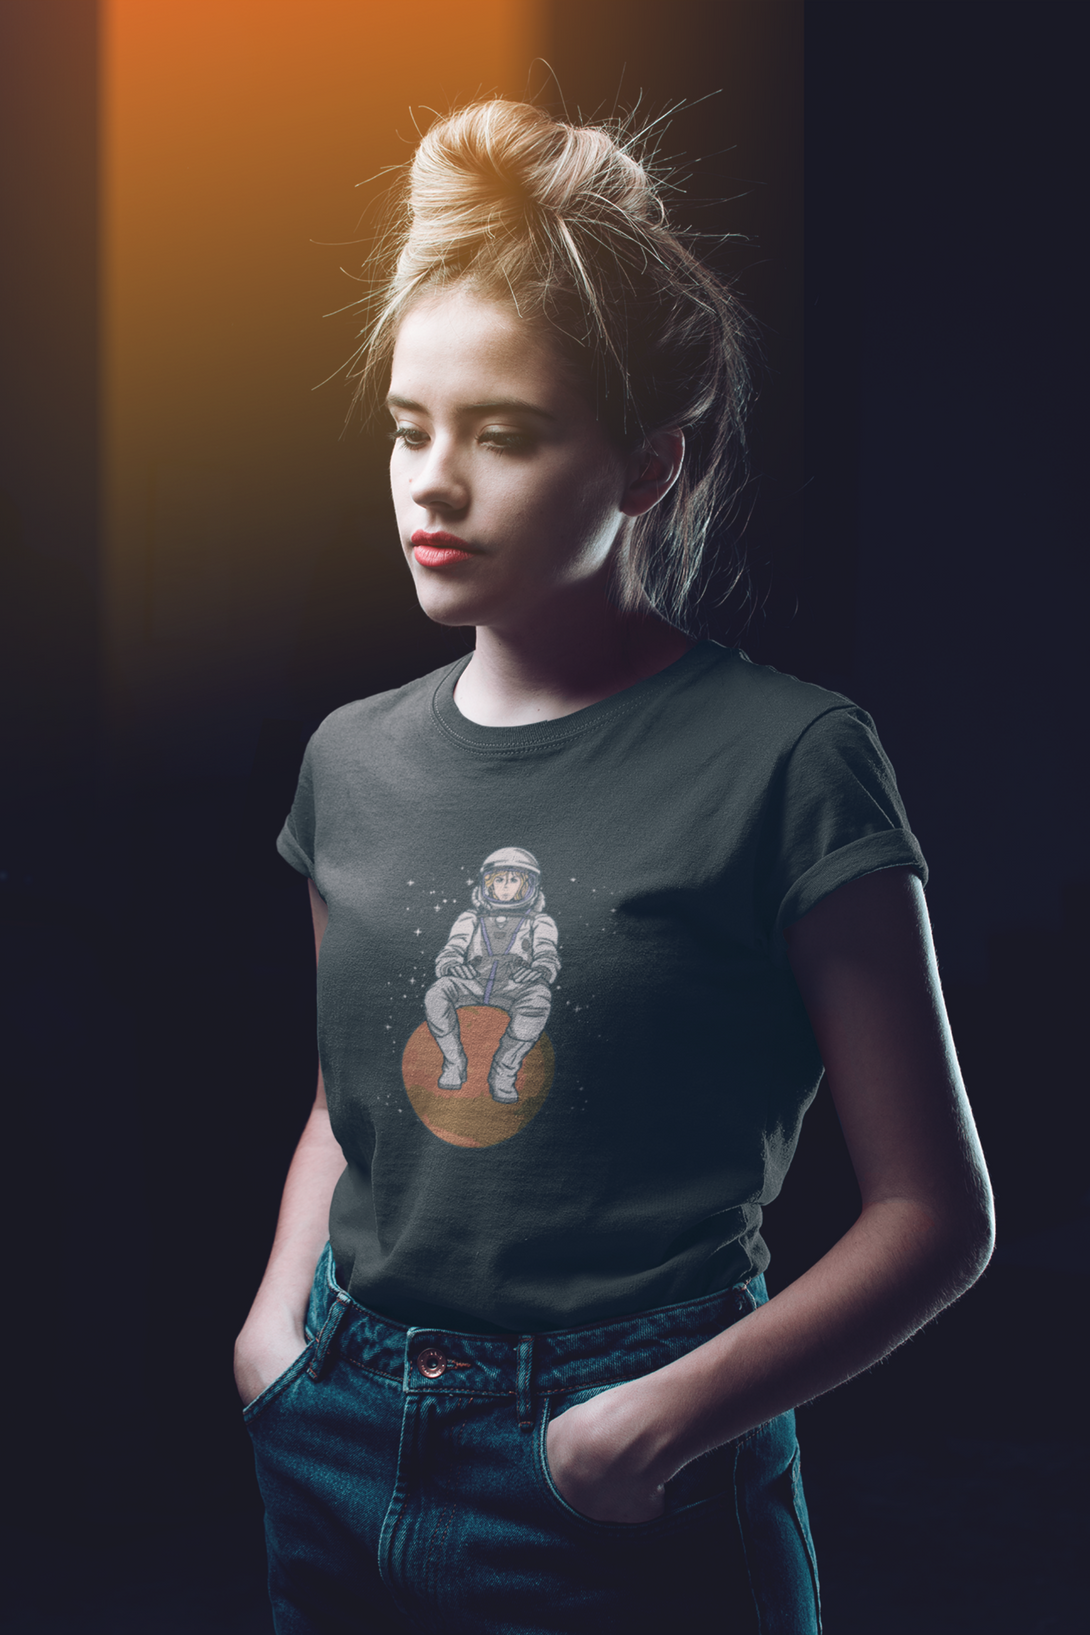 Space Explorer Printed T-Shirt For Women - WowWaves - 6